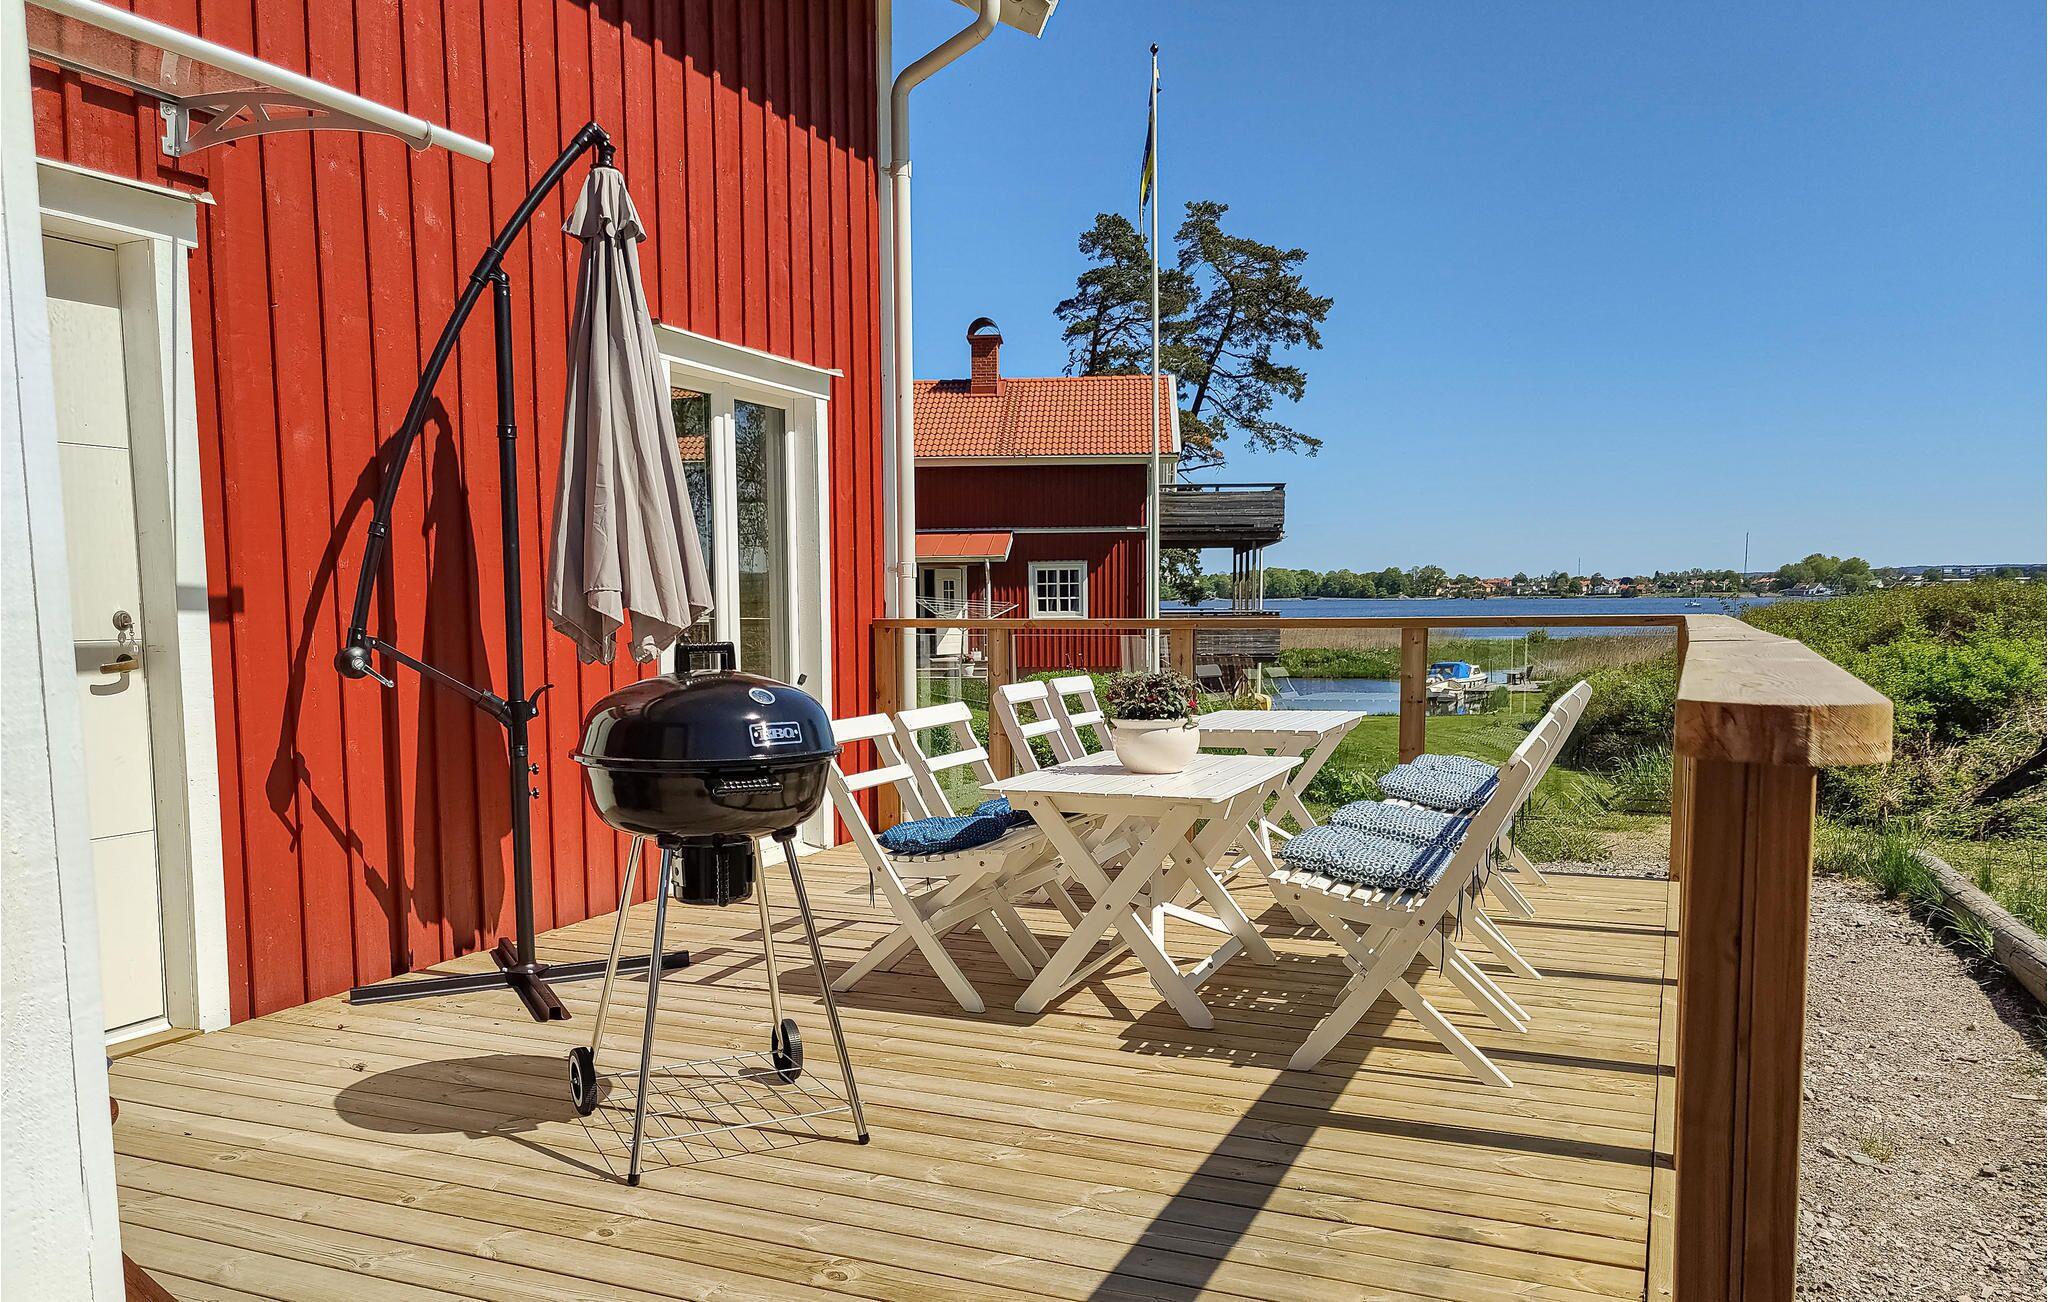 Pet Friendly Stunning 3BR Home in Vänersborg with Wifi